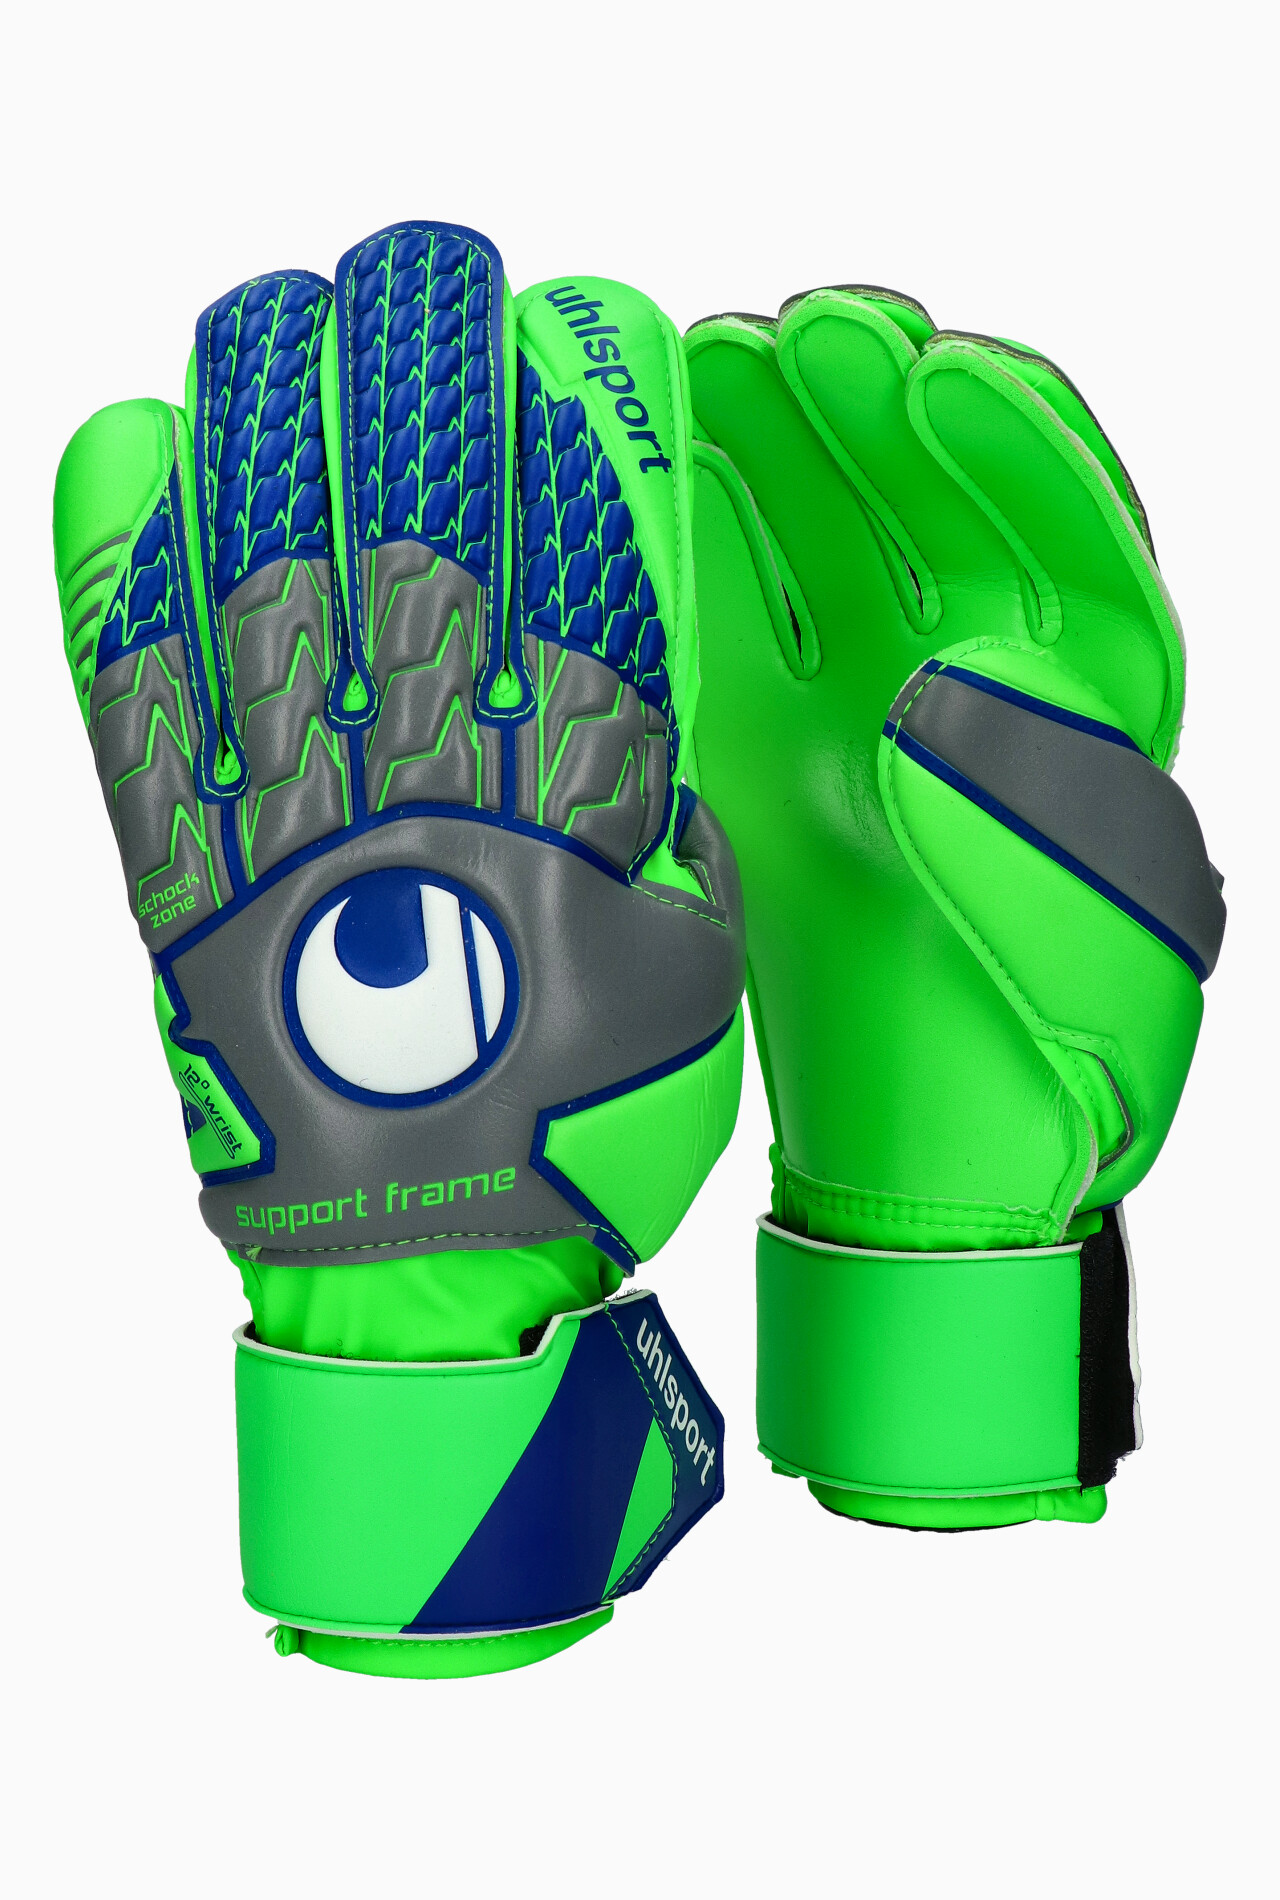 Uhlsport tensiongreen Soft SF Goalkeeper Glove with protectors Cheap Buy 